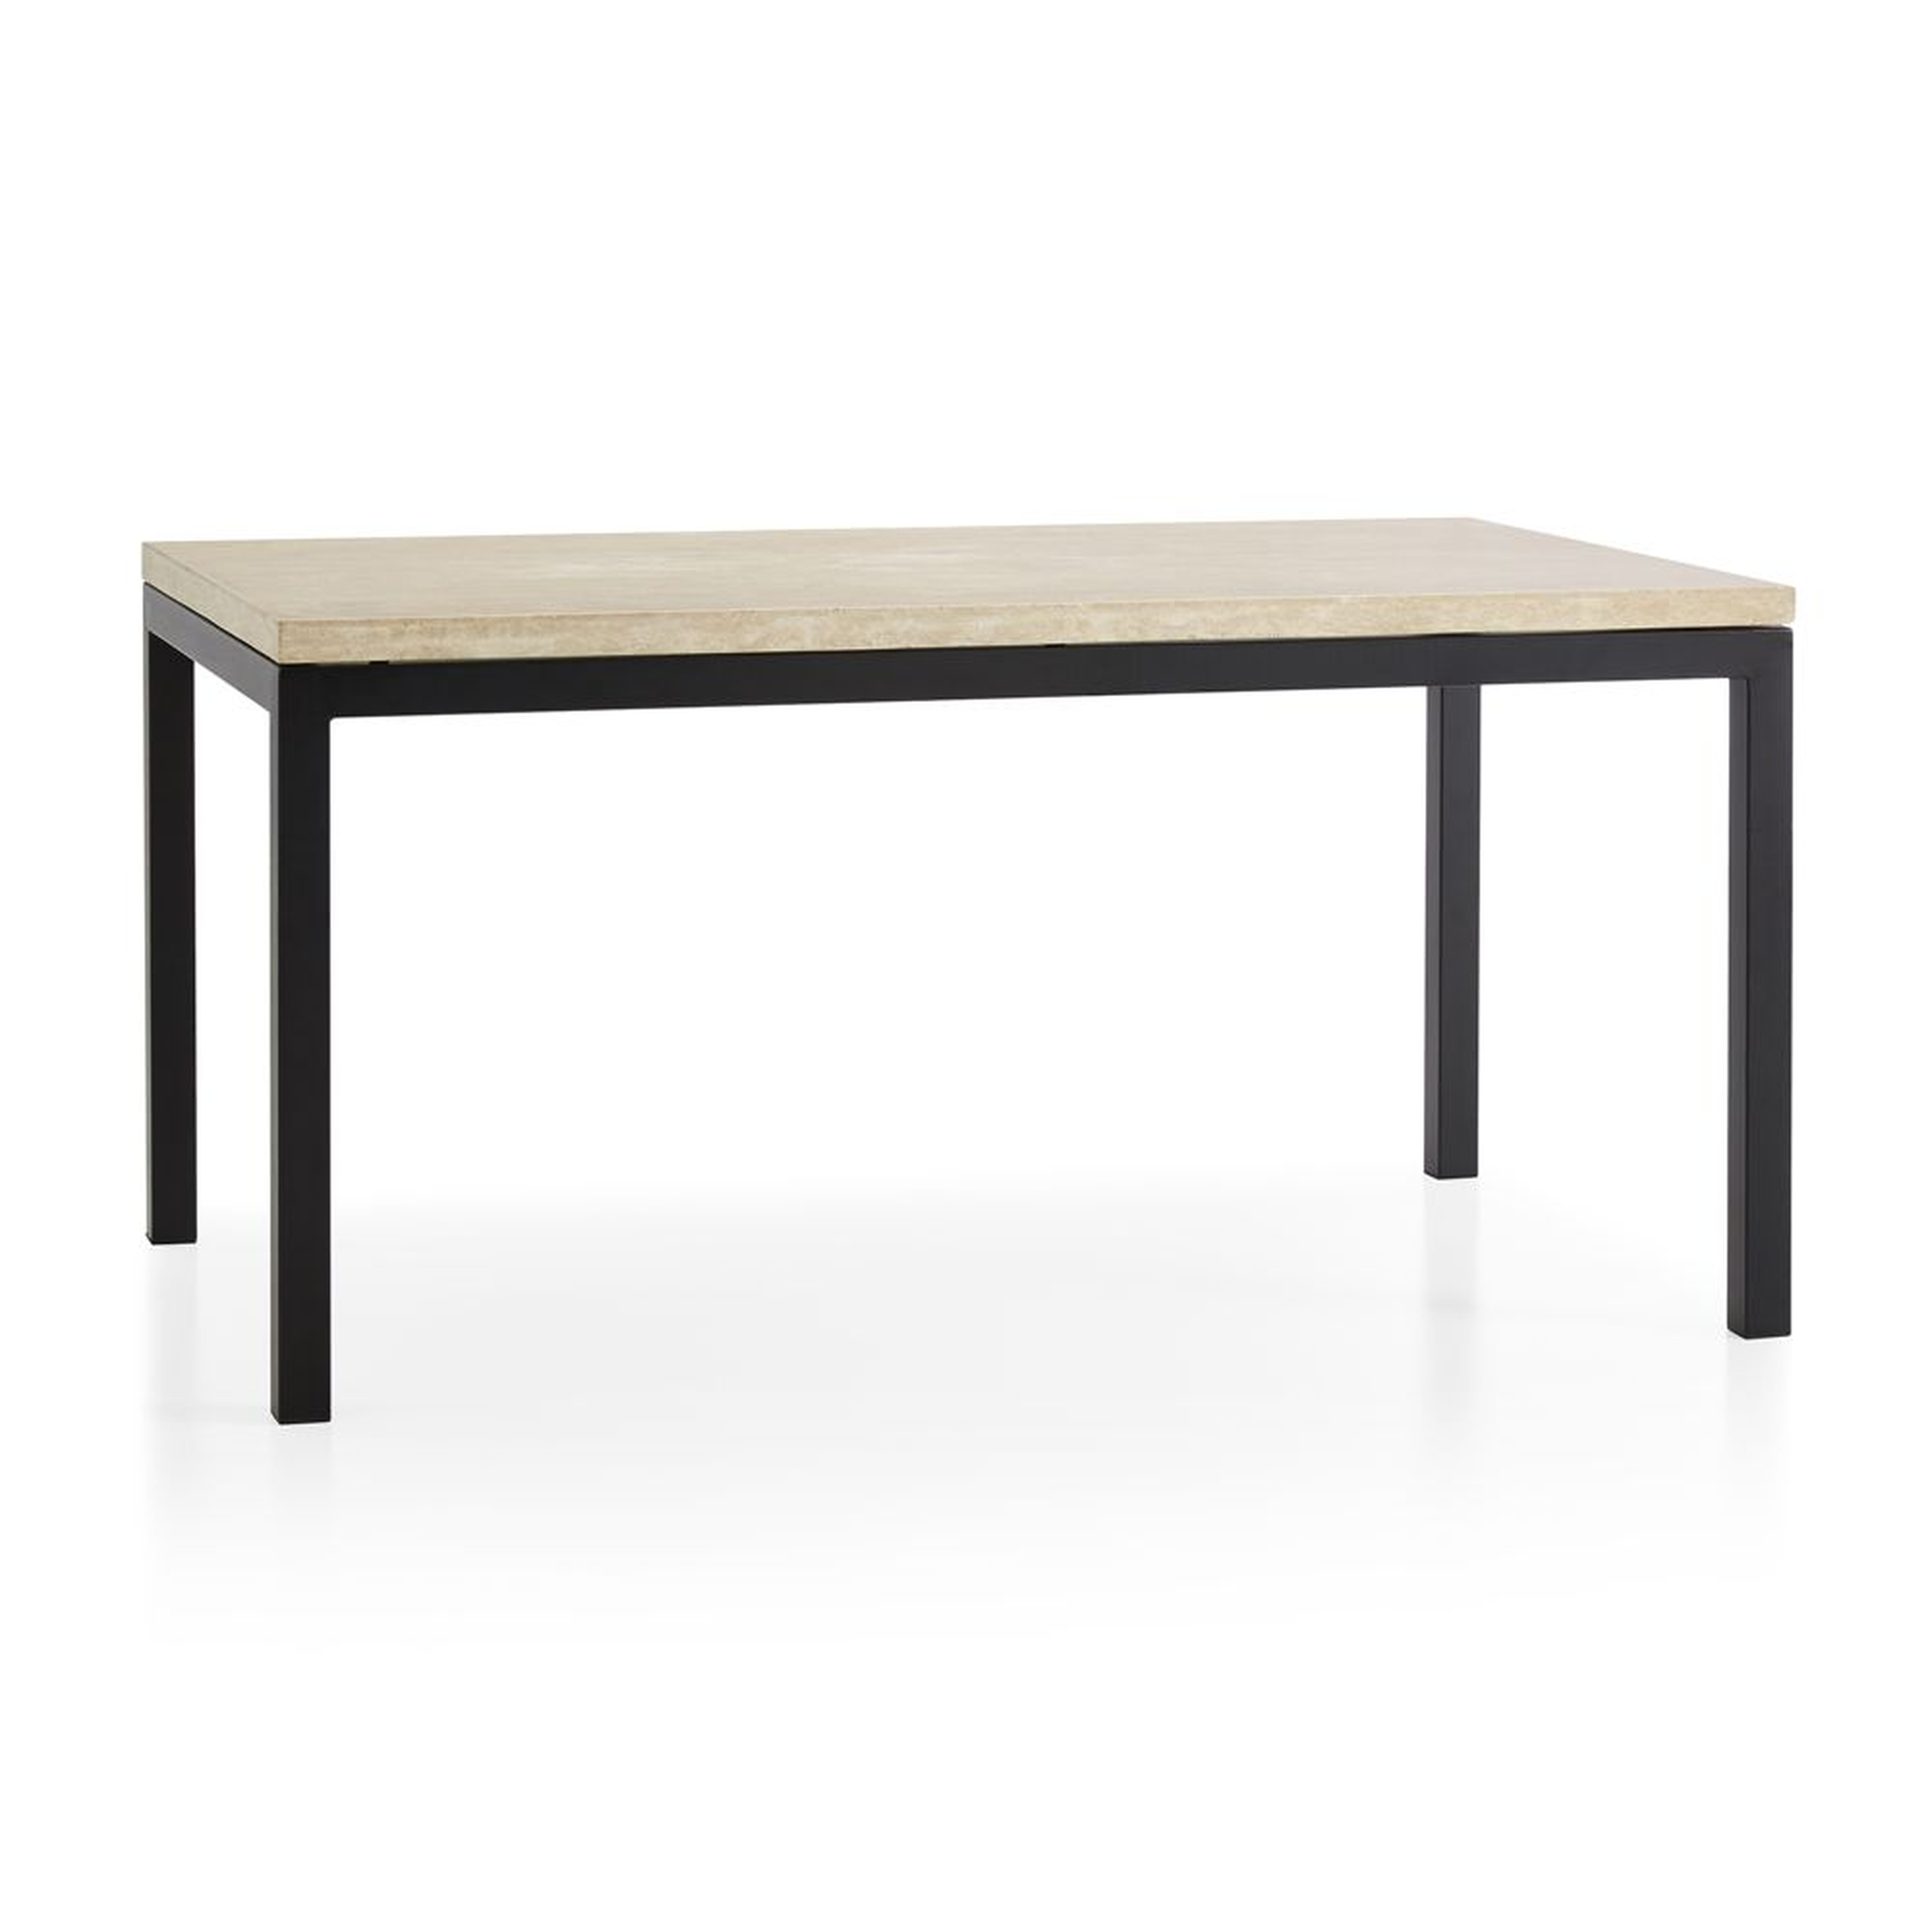 Parsons Travertine Top/Dark Steel Base 60x36 Dining Table - Crate and Barrel